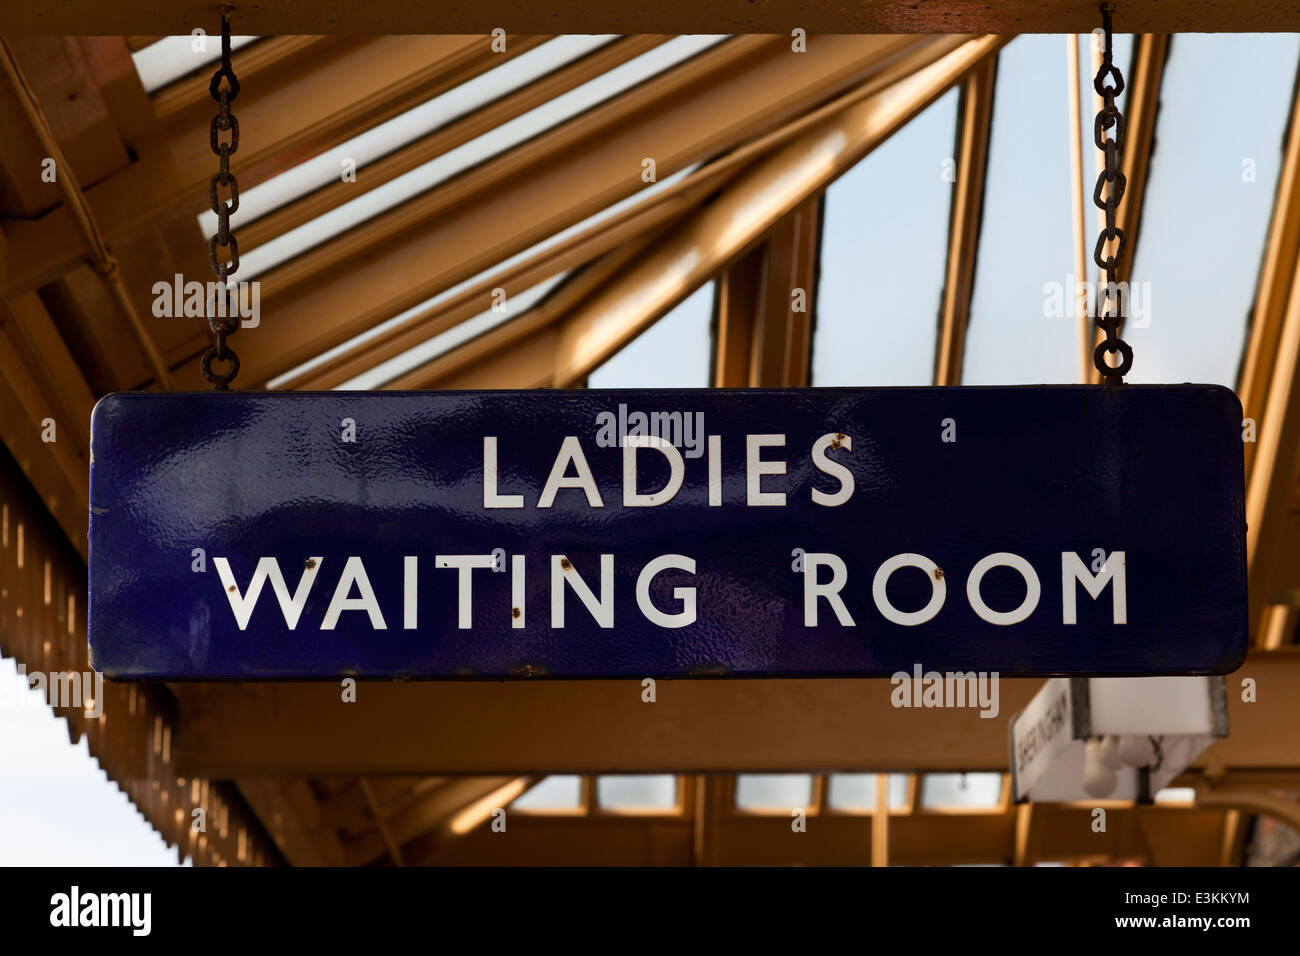 A 'ladies waiting room' sign at a railway station Stock Photo